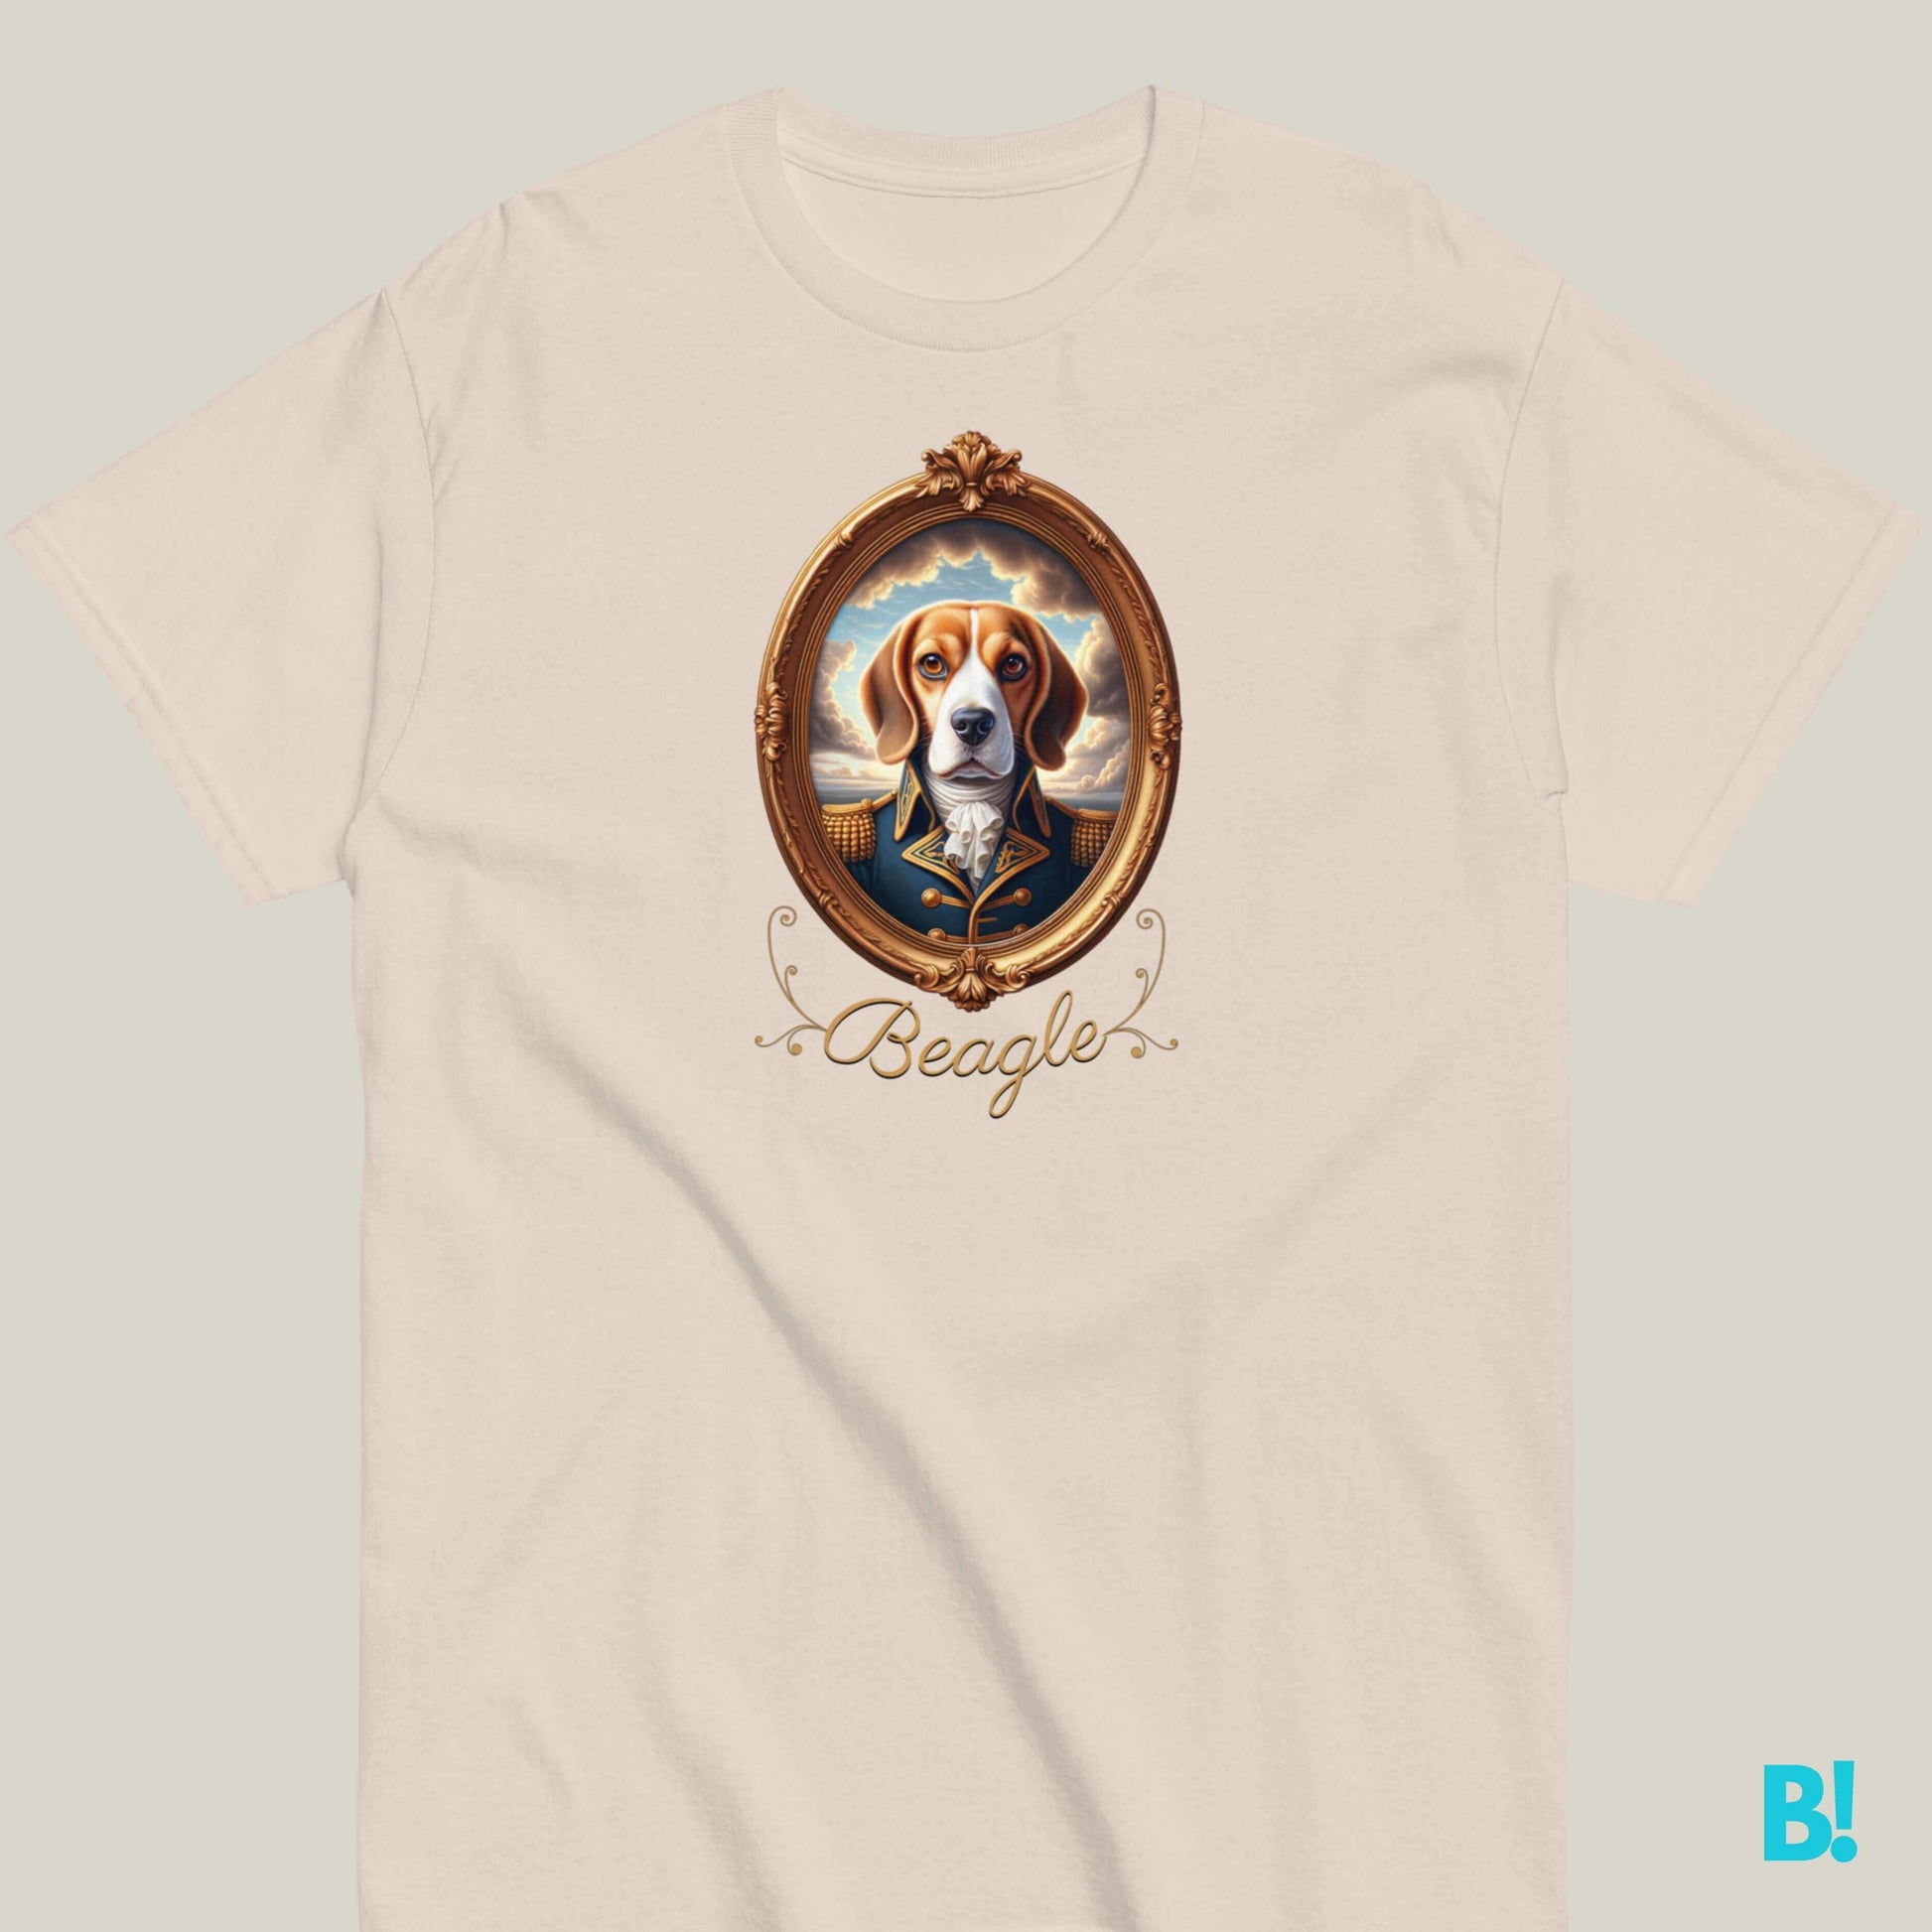 BEAGLE Unisex Cotton T-Shirt: Embrace Adventure Join the adventure with BEAGLE, a 100% cotton unisex T-shirt that celebrates curiosity and companionship. Available in 7 colours, sizes S-XXXL. €29.50 B!NKY Comfywear